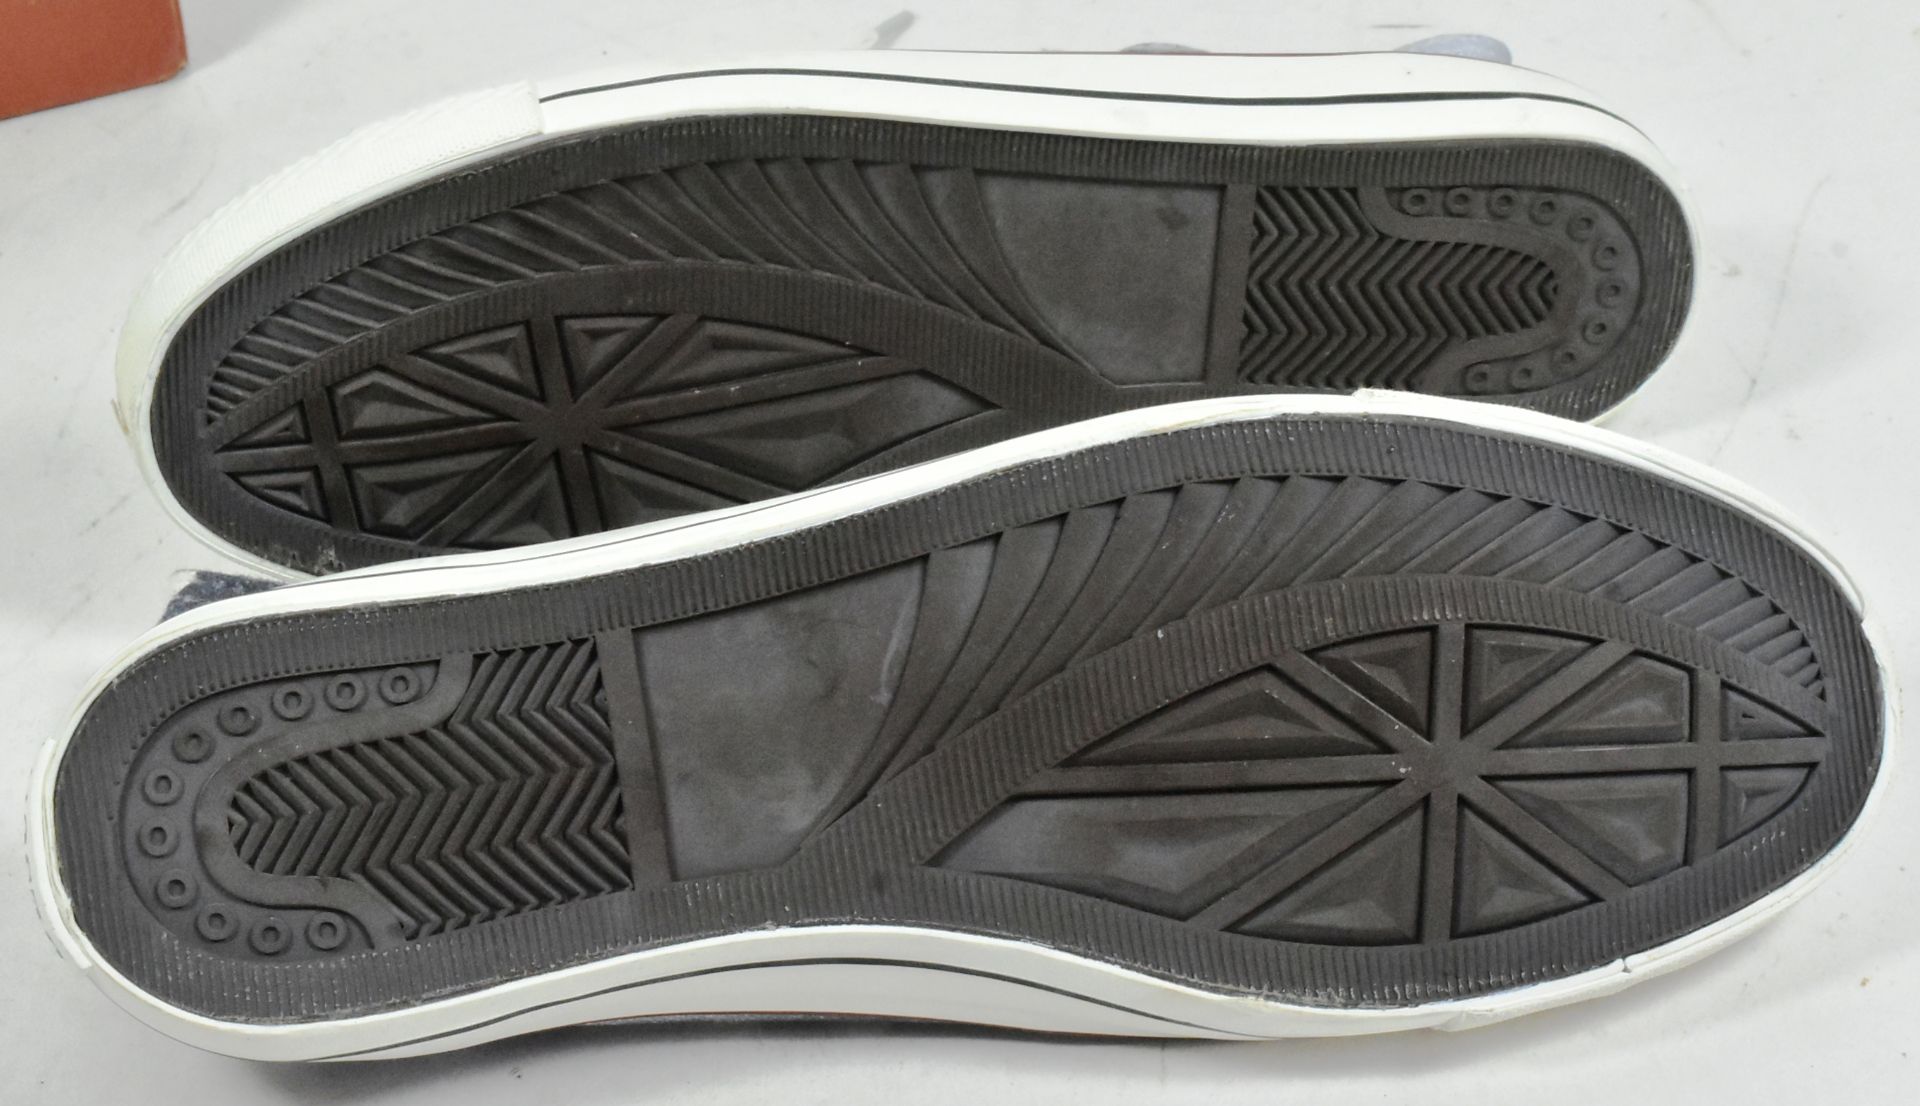 DOCTOR WHO DESUN CONVERSE STYLE HIGH TOP TRAINERS - Image 5 of 6